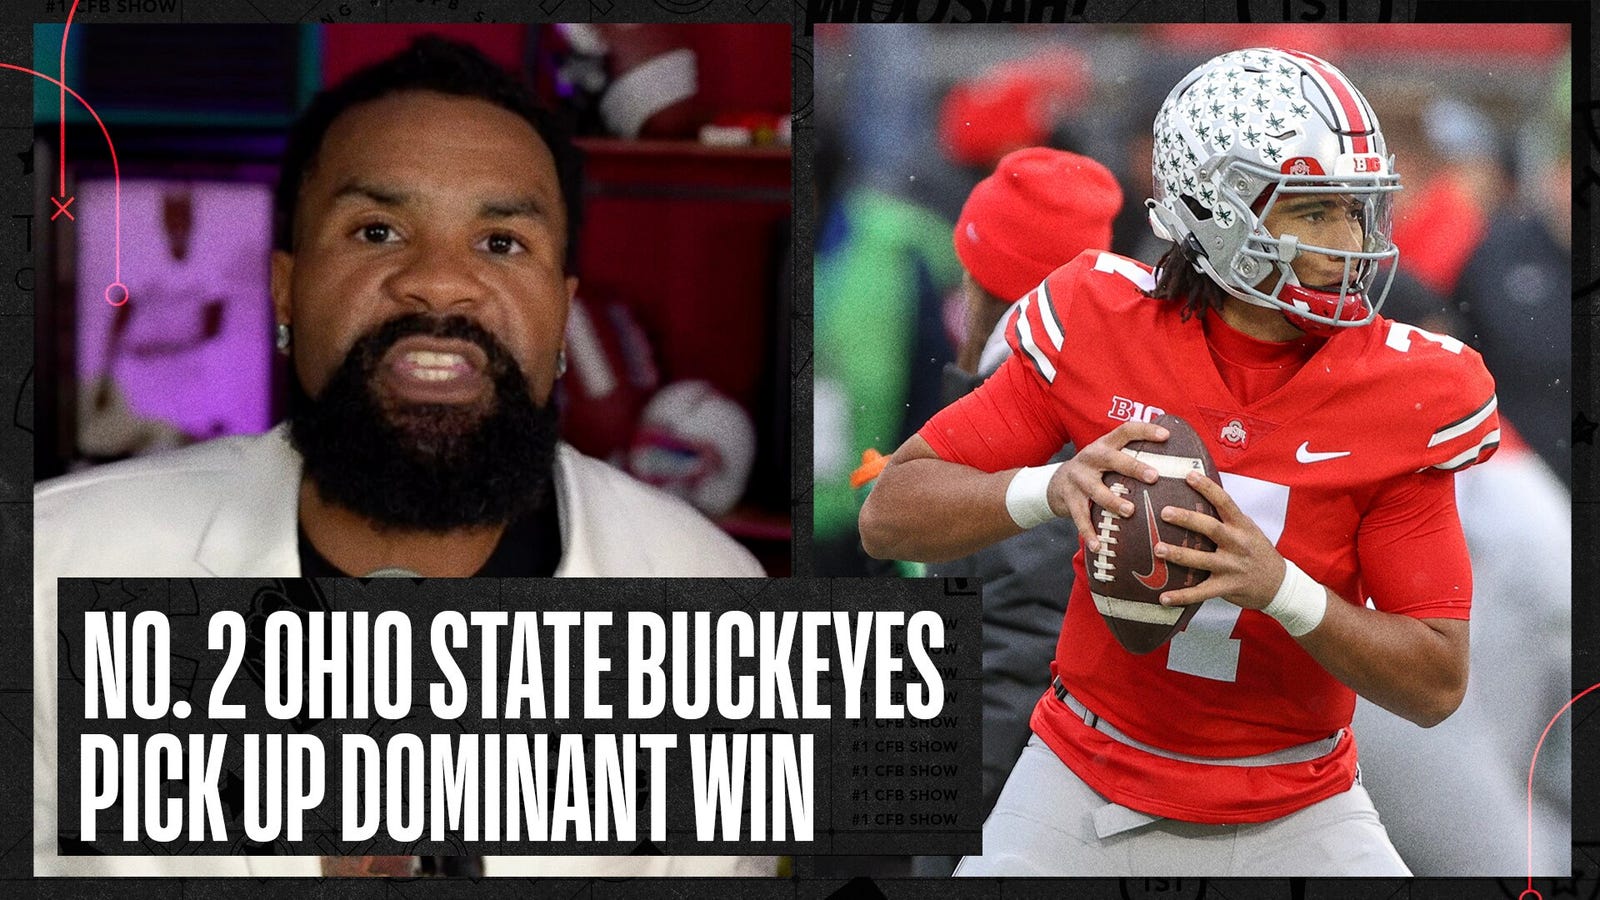 No. 2 Ohio State picks up dominant victory